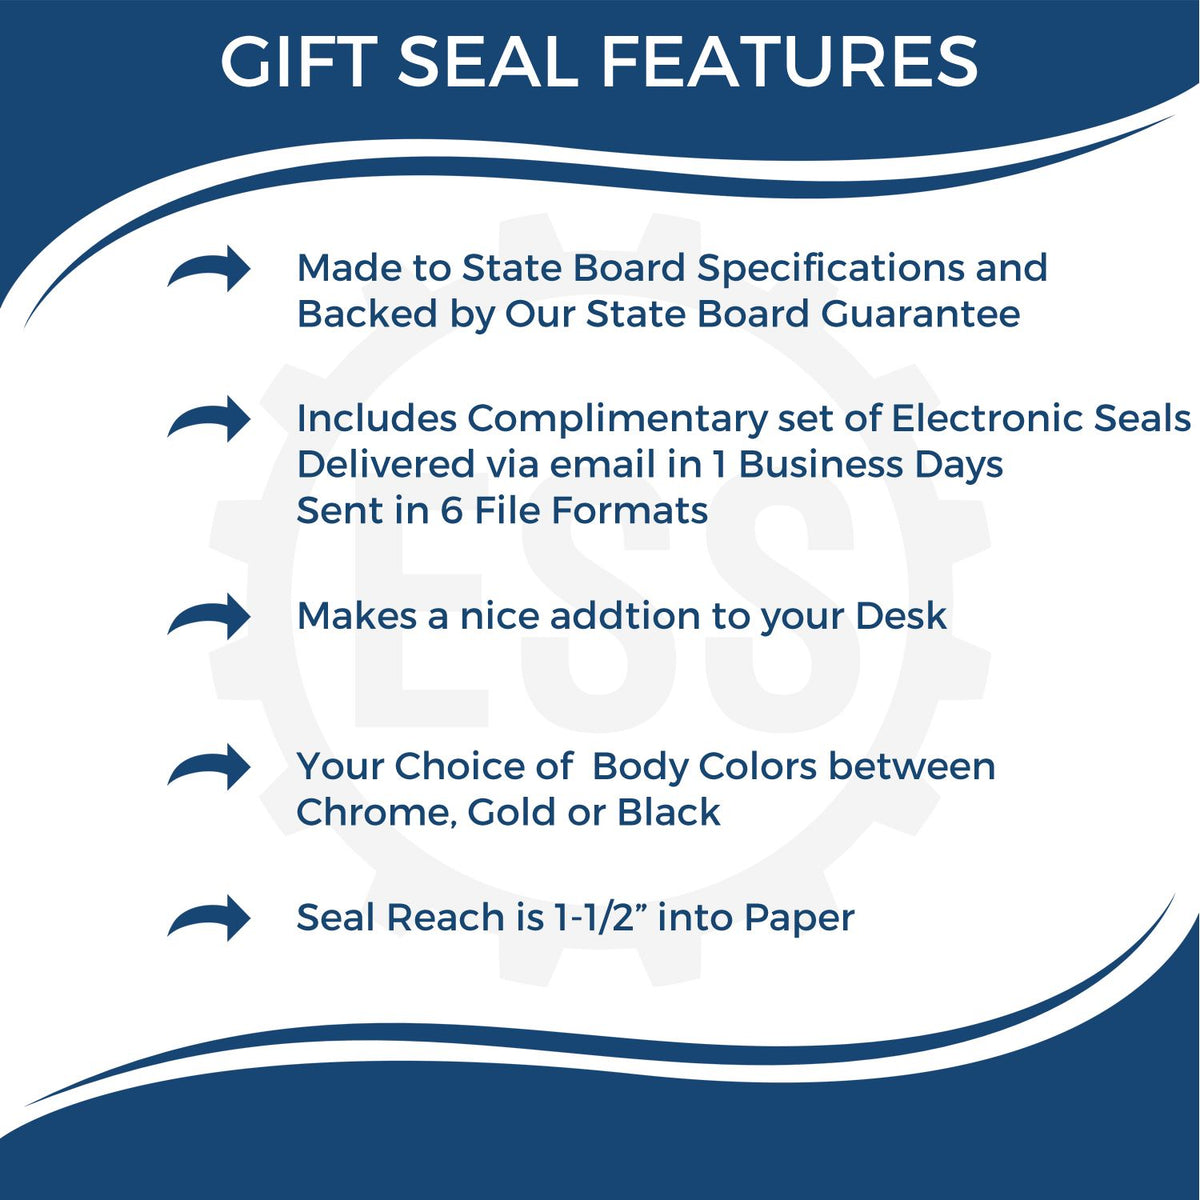 A picture of an infographic highlighting the selling points for the Gift California Engineer Seal